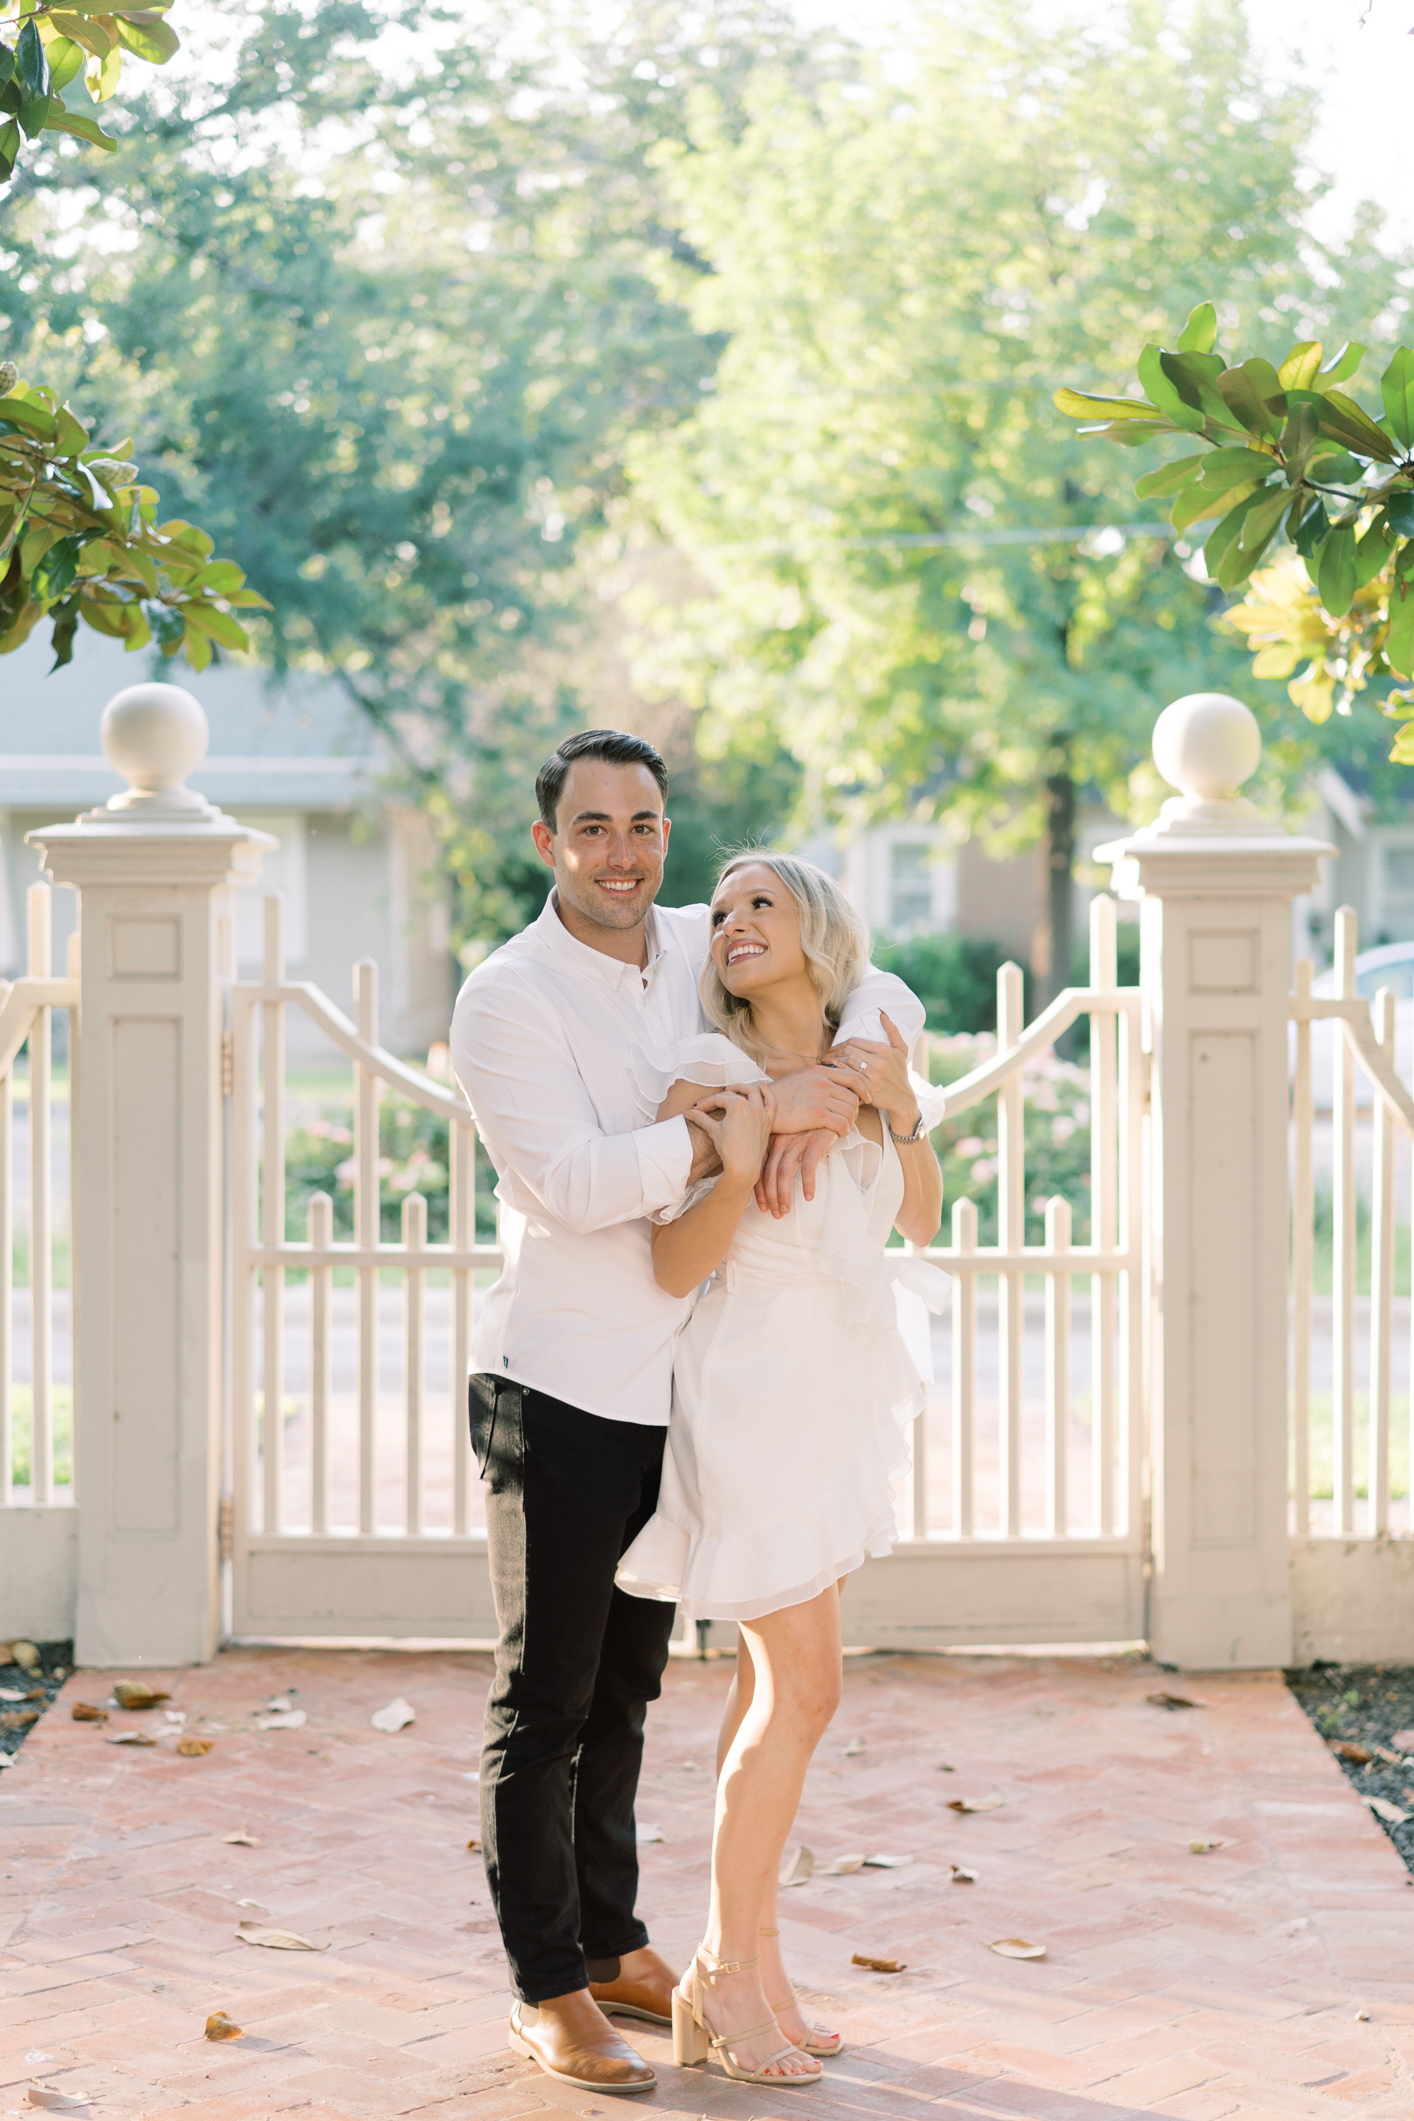 Perfect lighting + an adorable couple = the perfect Woodbine Mansion engagement session! This is seriously the best venue in Austin!